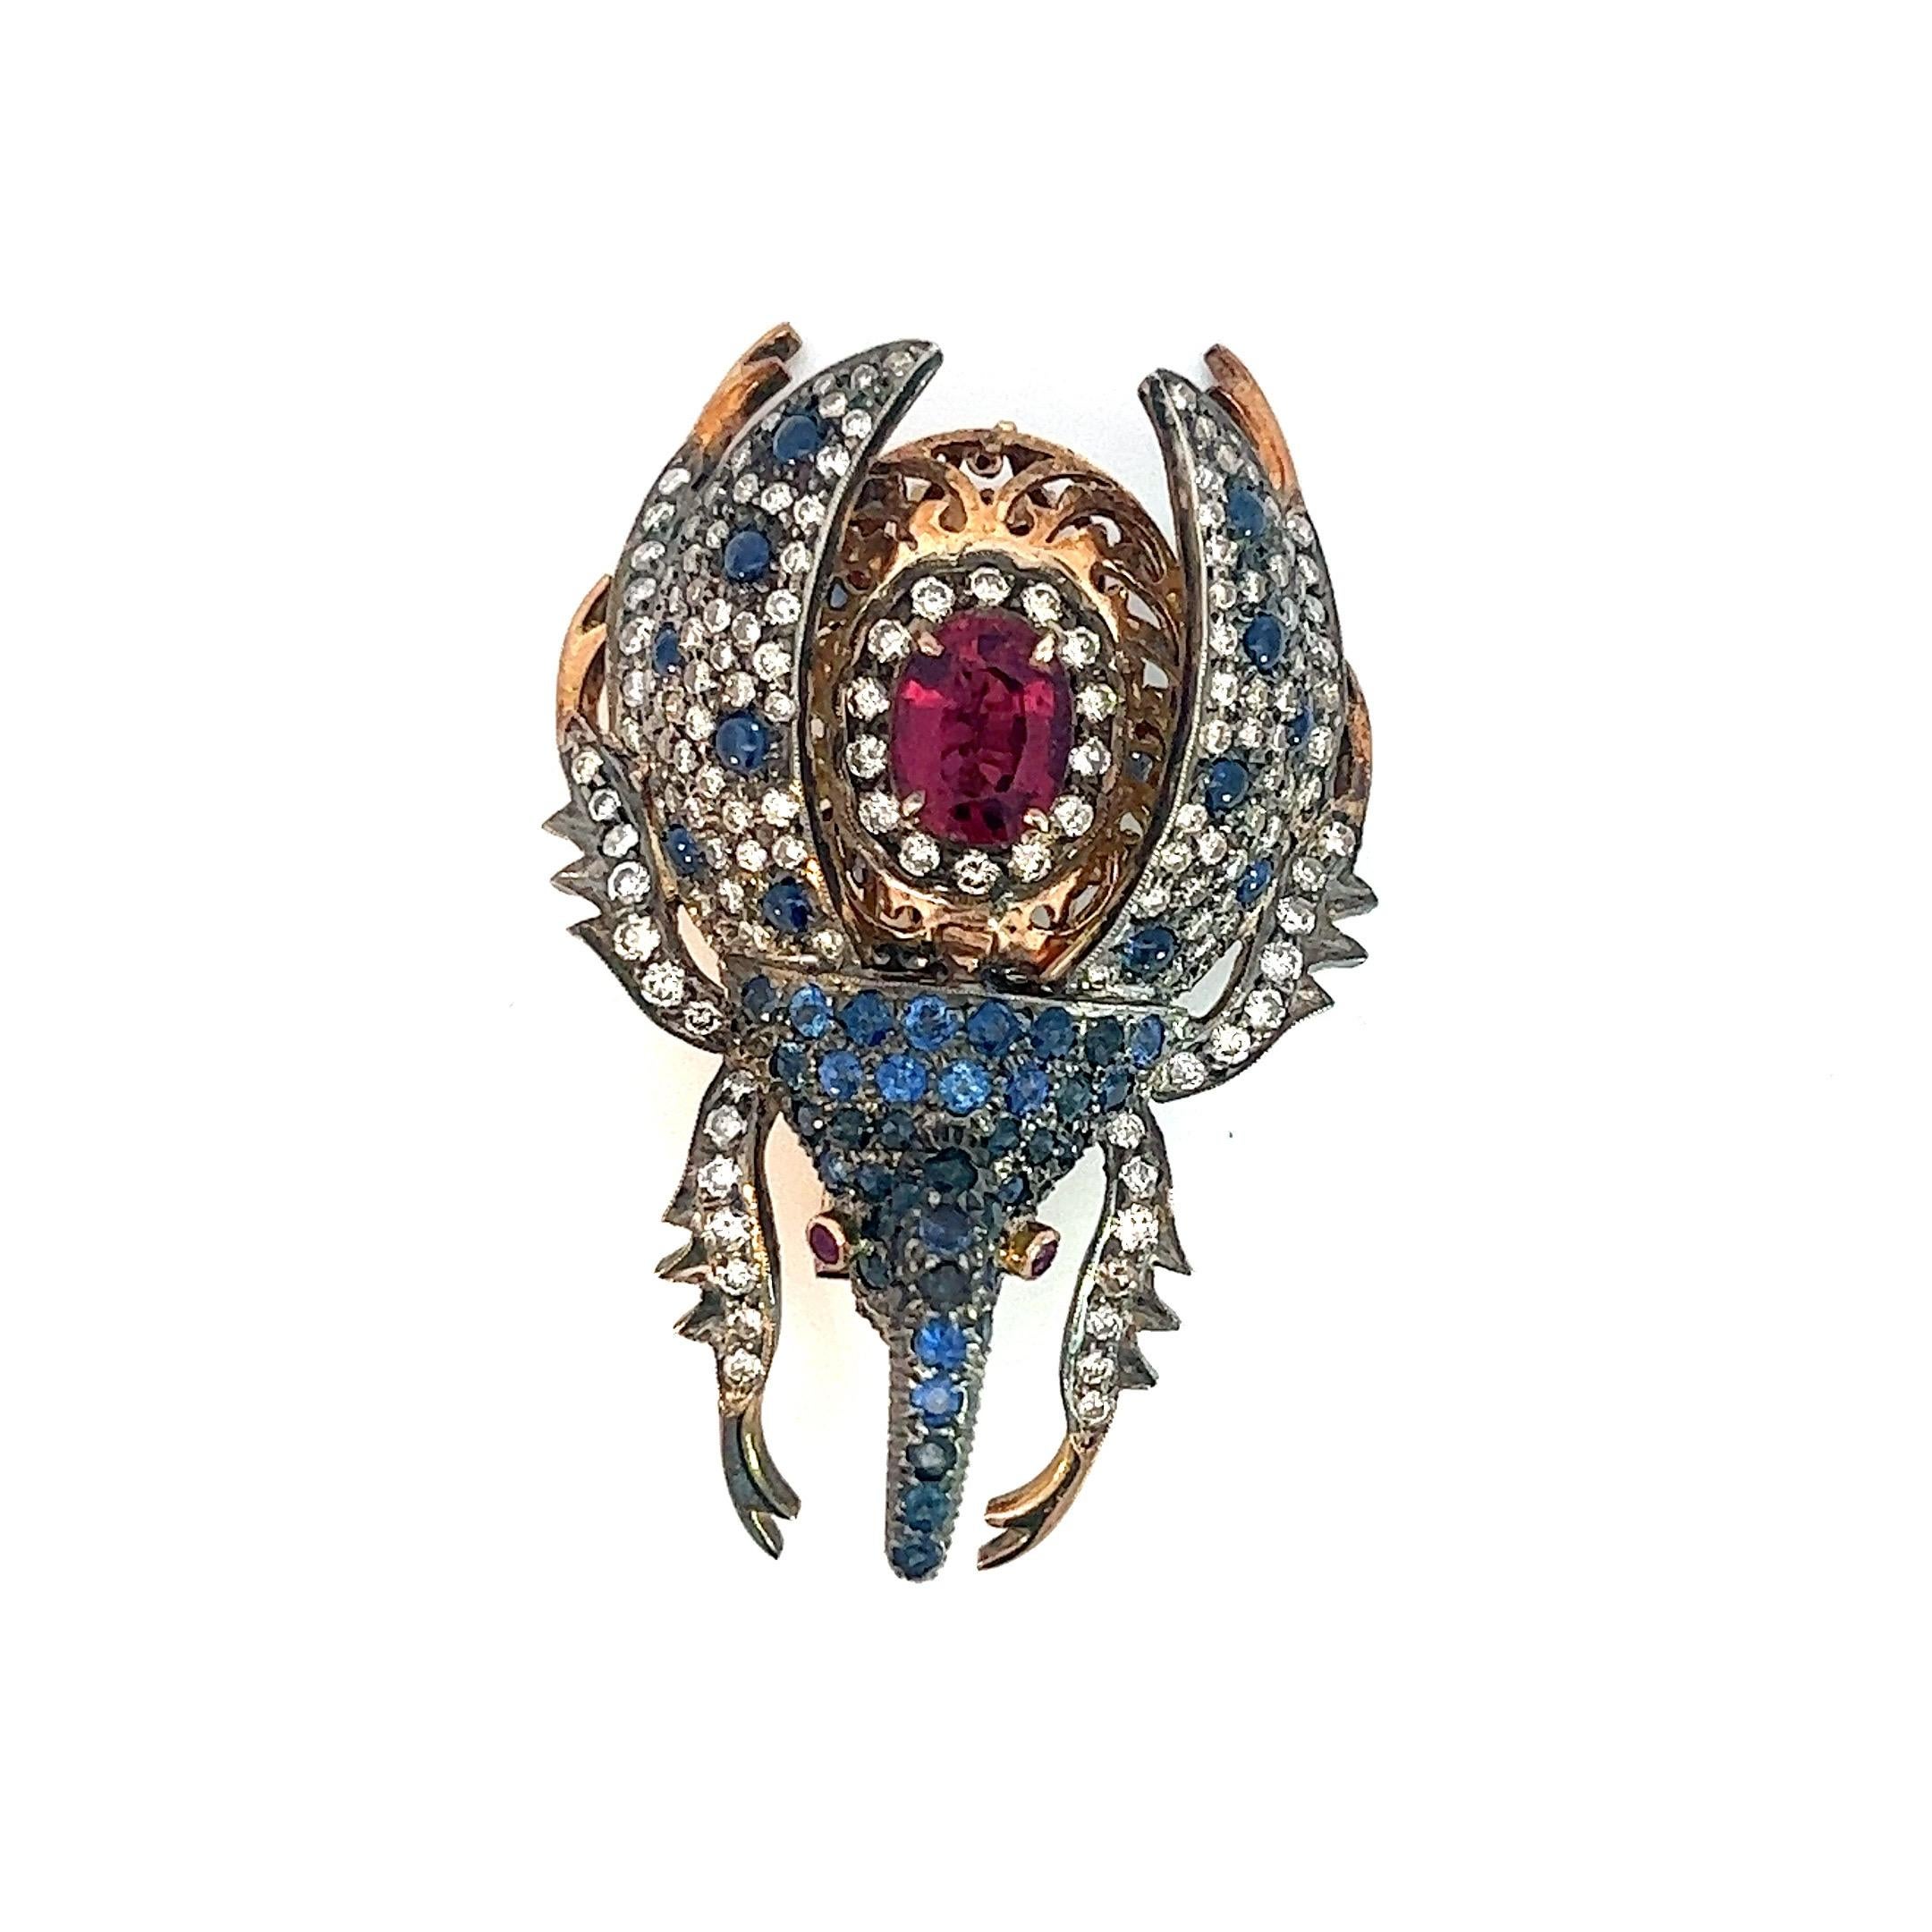 Introducing our extraordinary 3 Carat Diamond, 2 Carats Sapphire, and 3.5 Carat Spinel Beetle Pin, a truly remarkable piece of jewelry that showcases the captivating beauty of diamonds, sapphires, and spinels, all set in opulent 18K gold. This